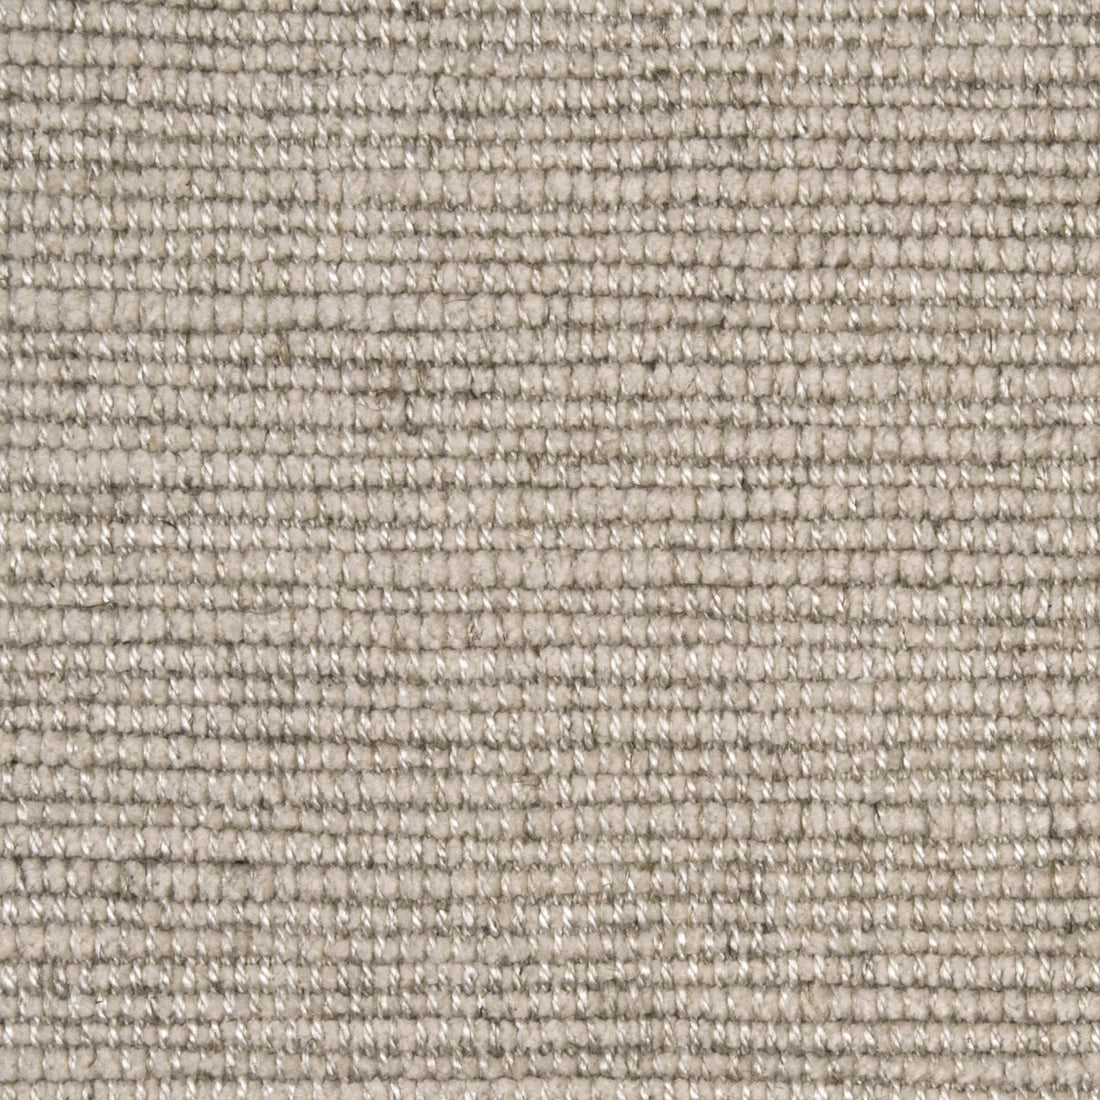 Charisma fabric in biscuit color - pattern ED85189.235.0 - by Threads in the Threads Colour Library collection